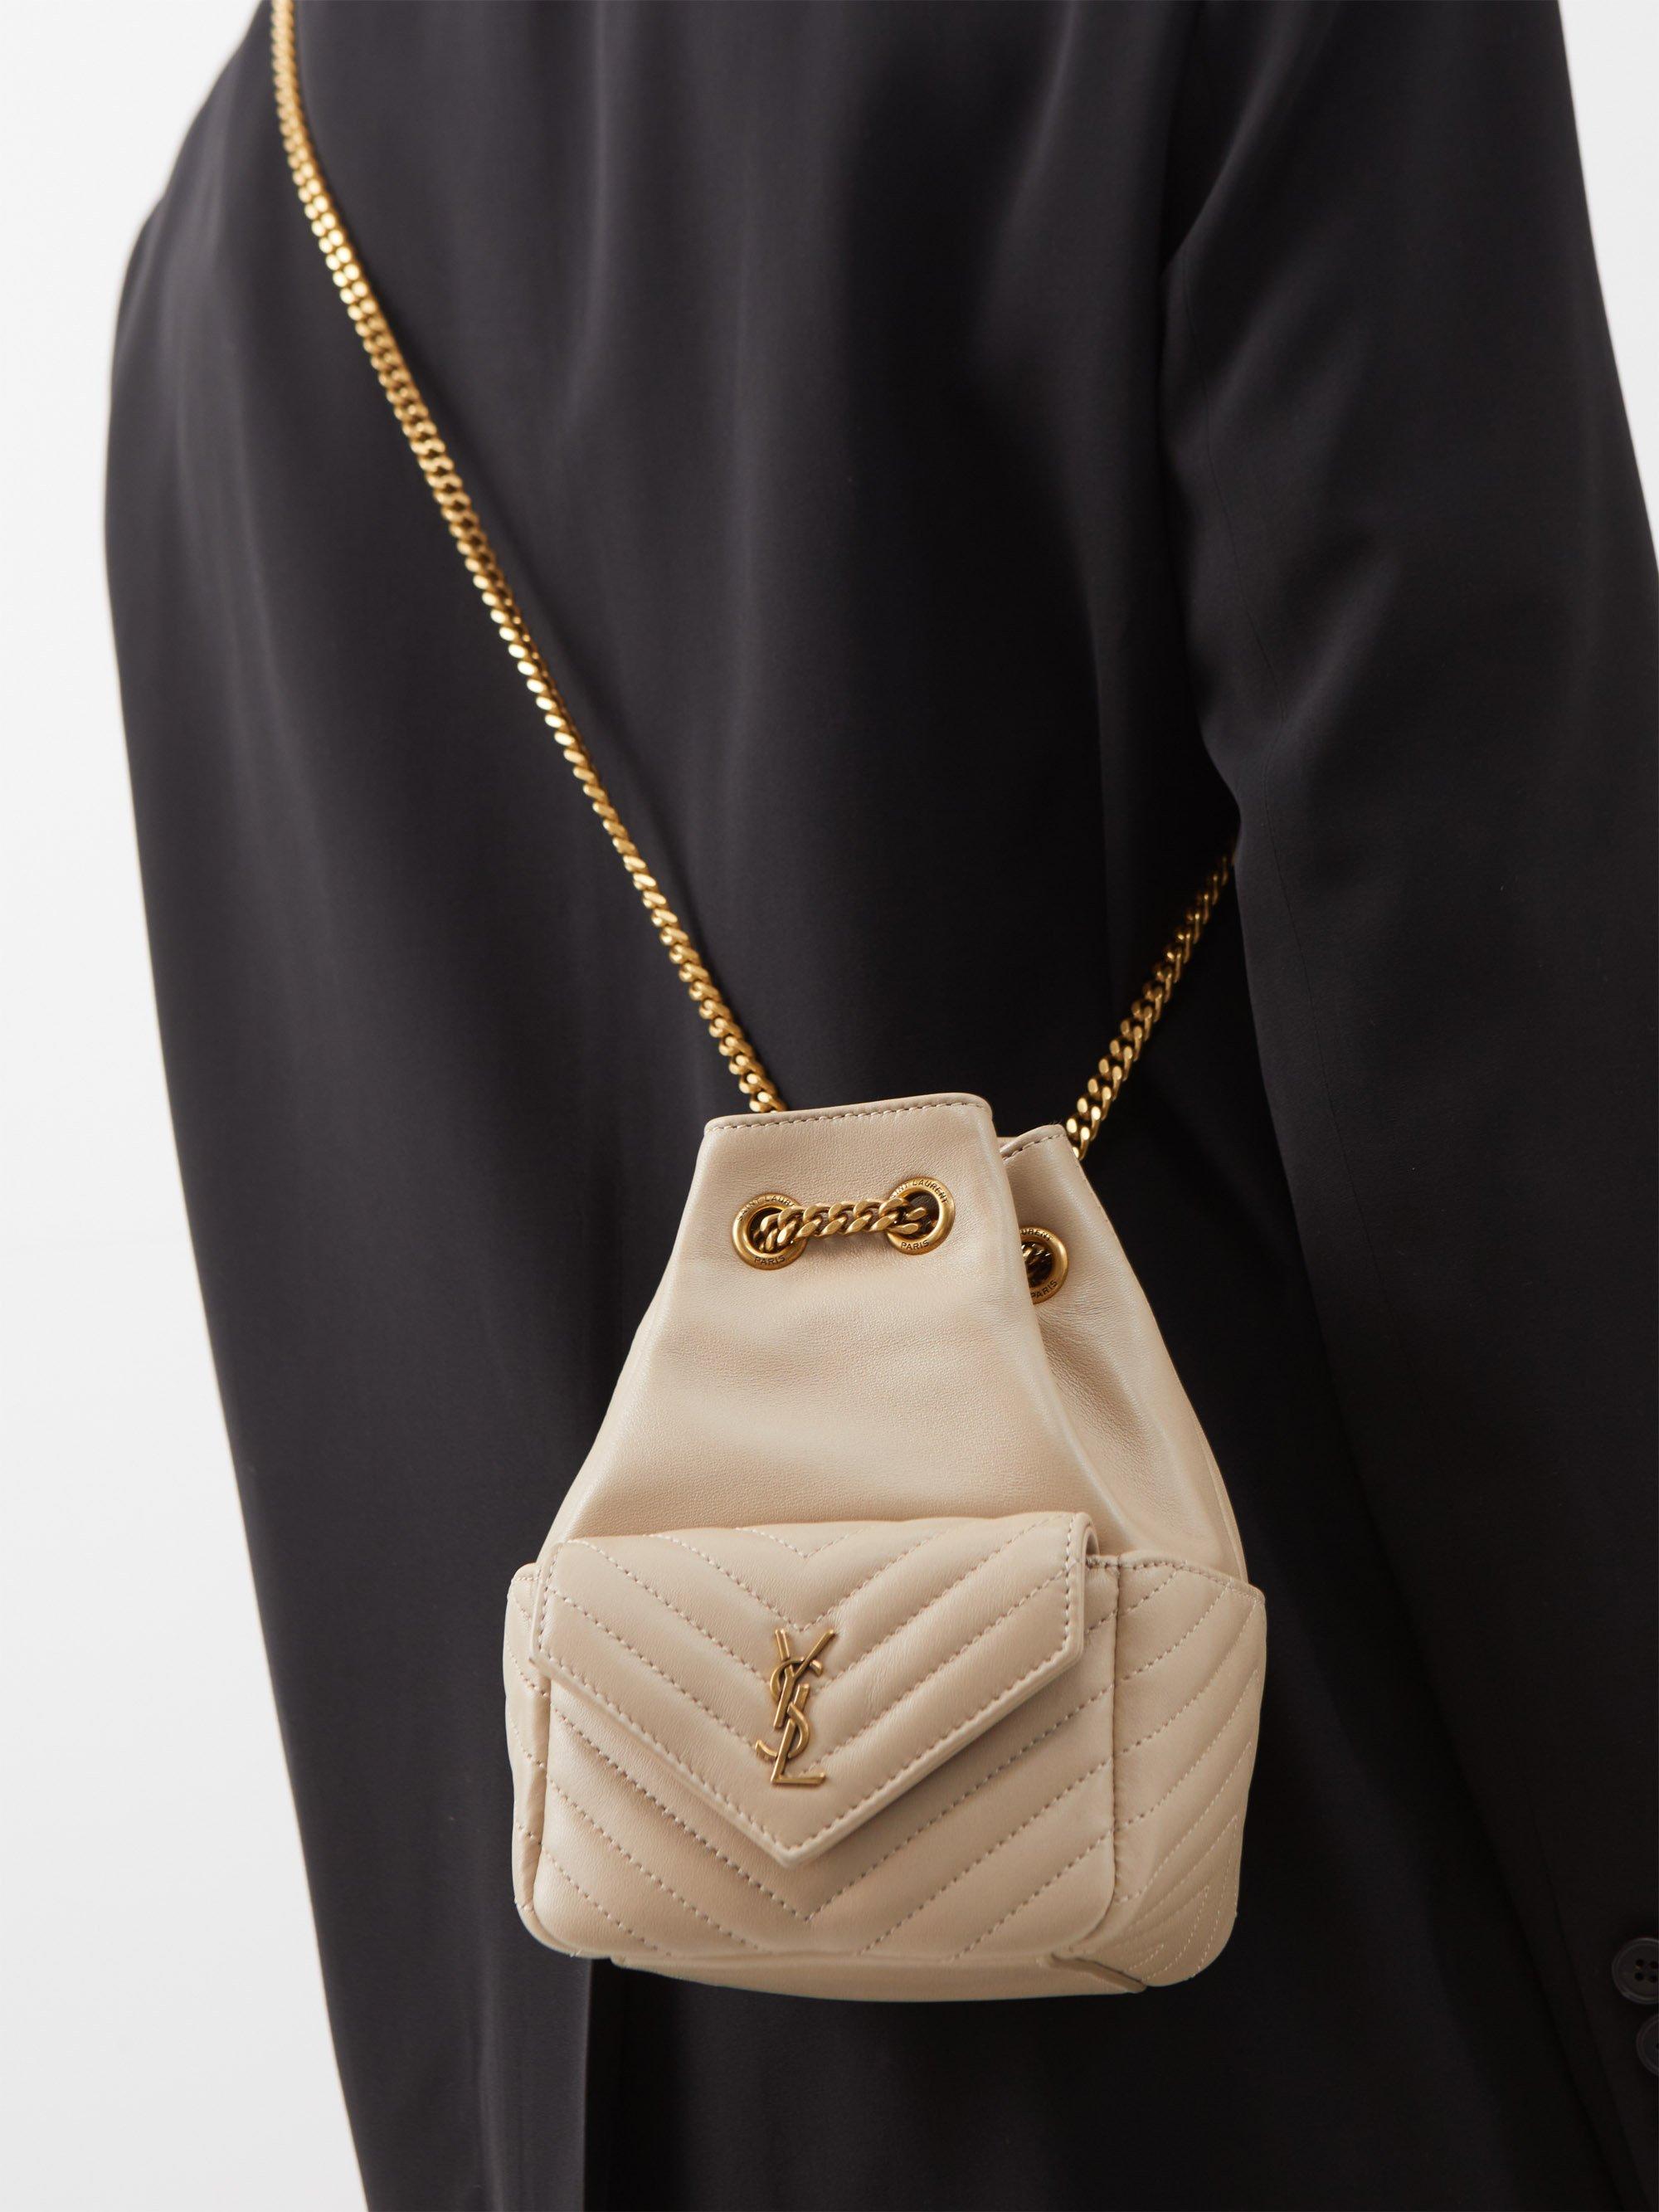 Saint Laurent Joe Mini Quilted-leather Bucket Bag in Natural | Lyst